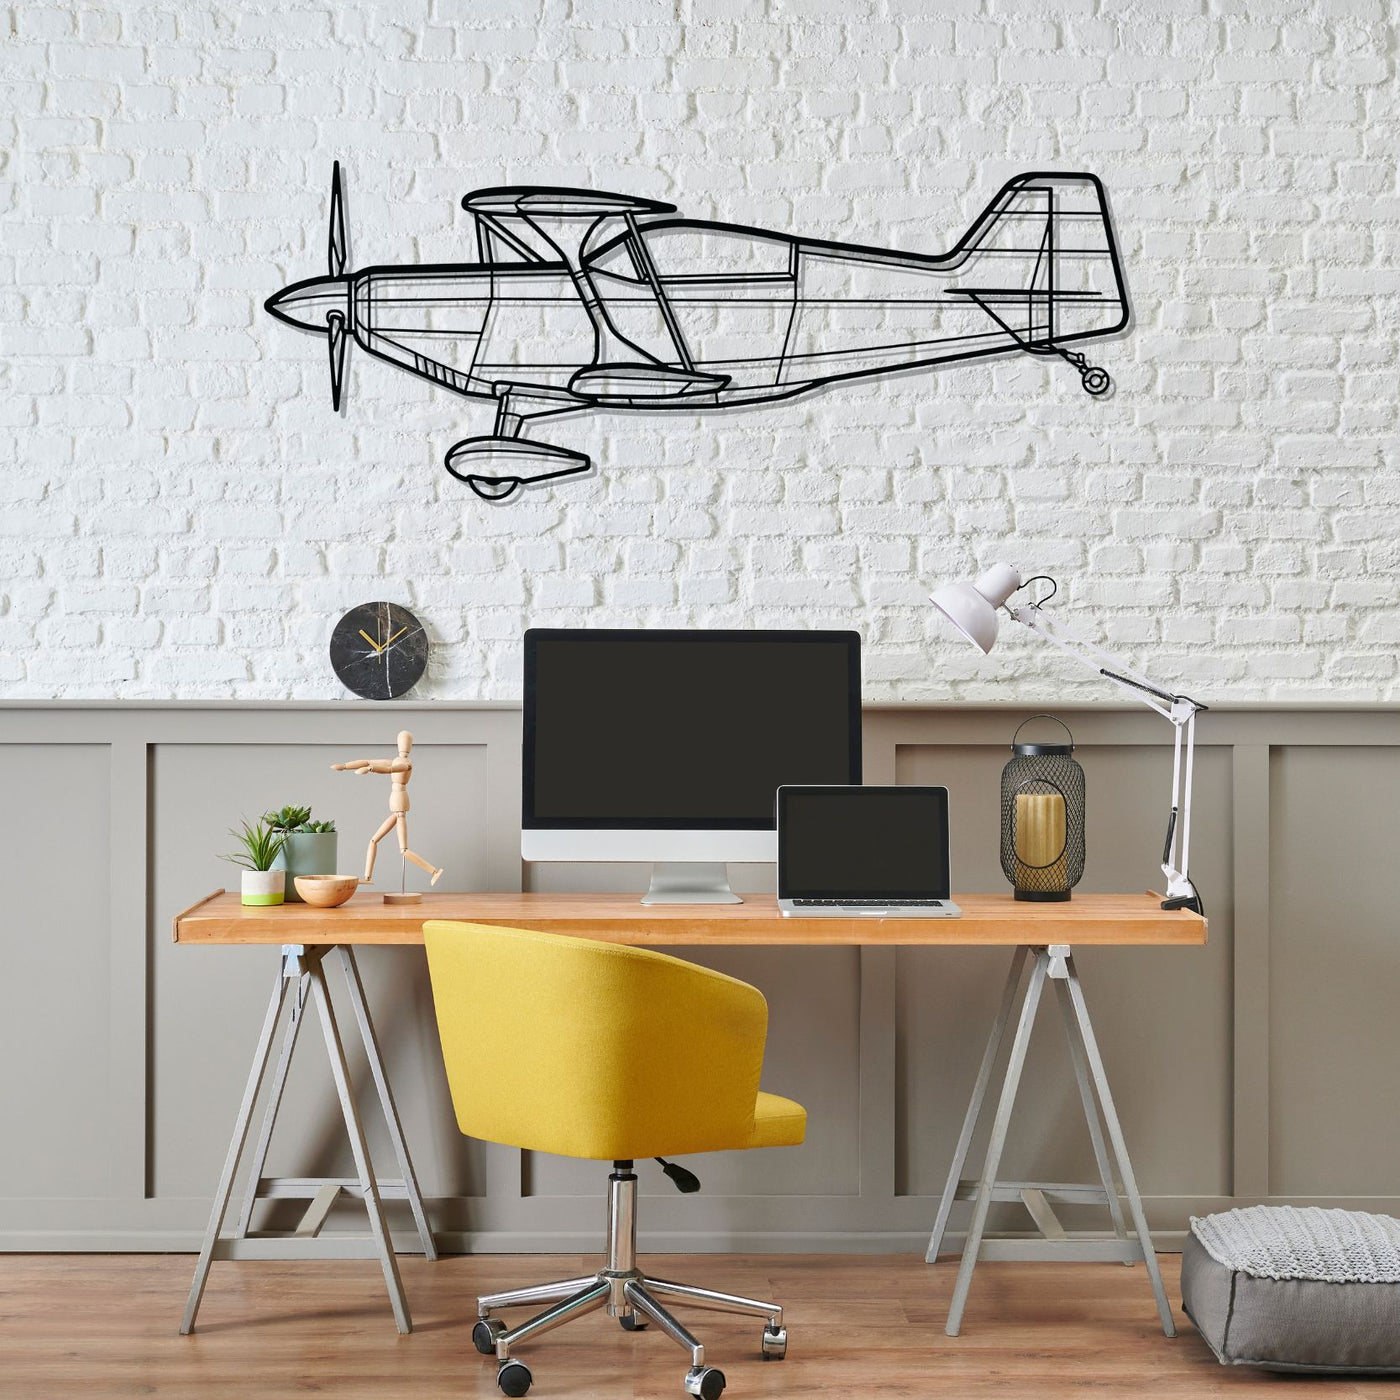 Pitts S2-C Silhouette Metal Wall Art